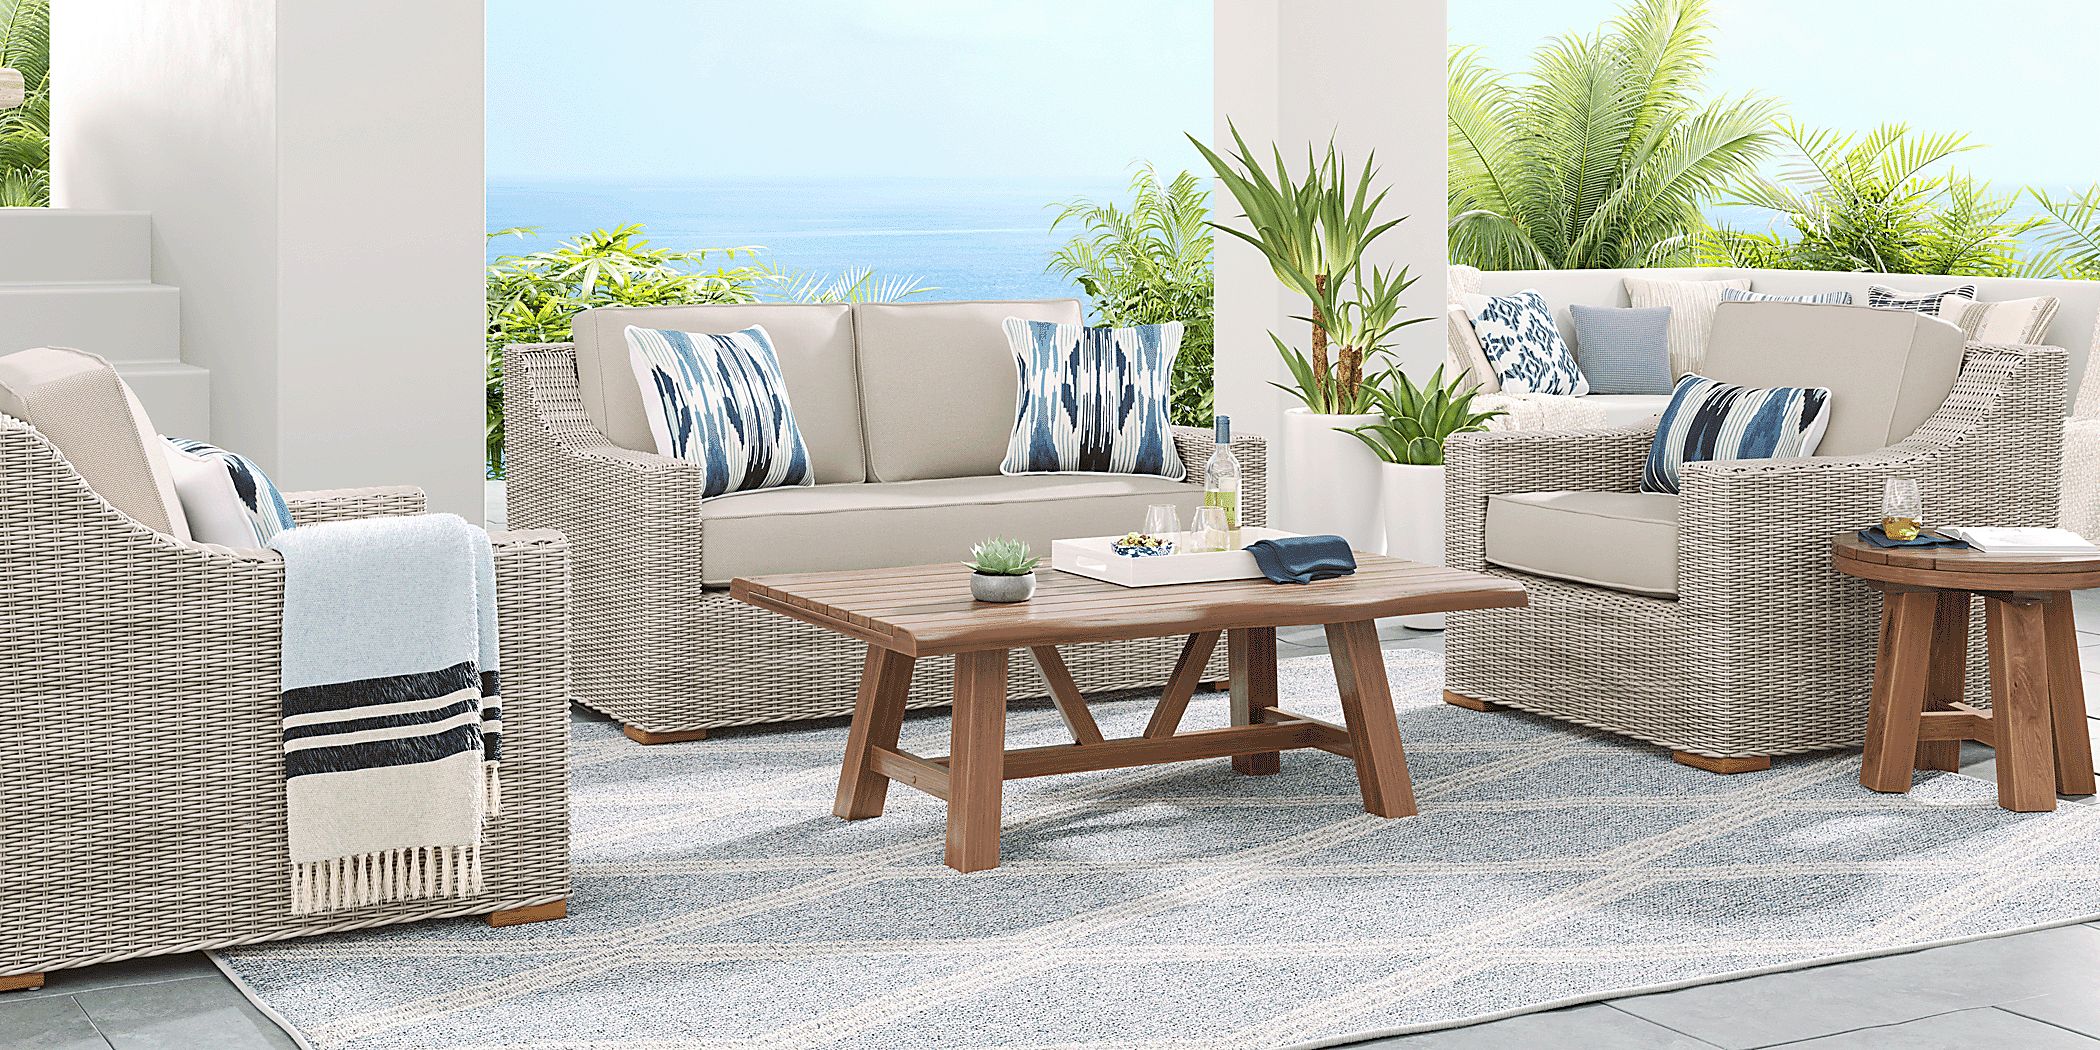 Rooms To Go Outdoor Patmos Gray 4 Pc Outdoor Loveseat Seating Set with Linen Cushions